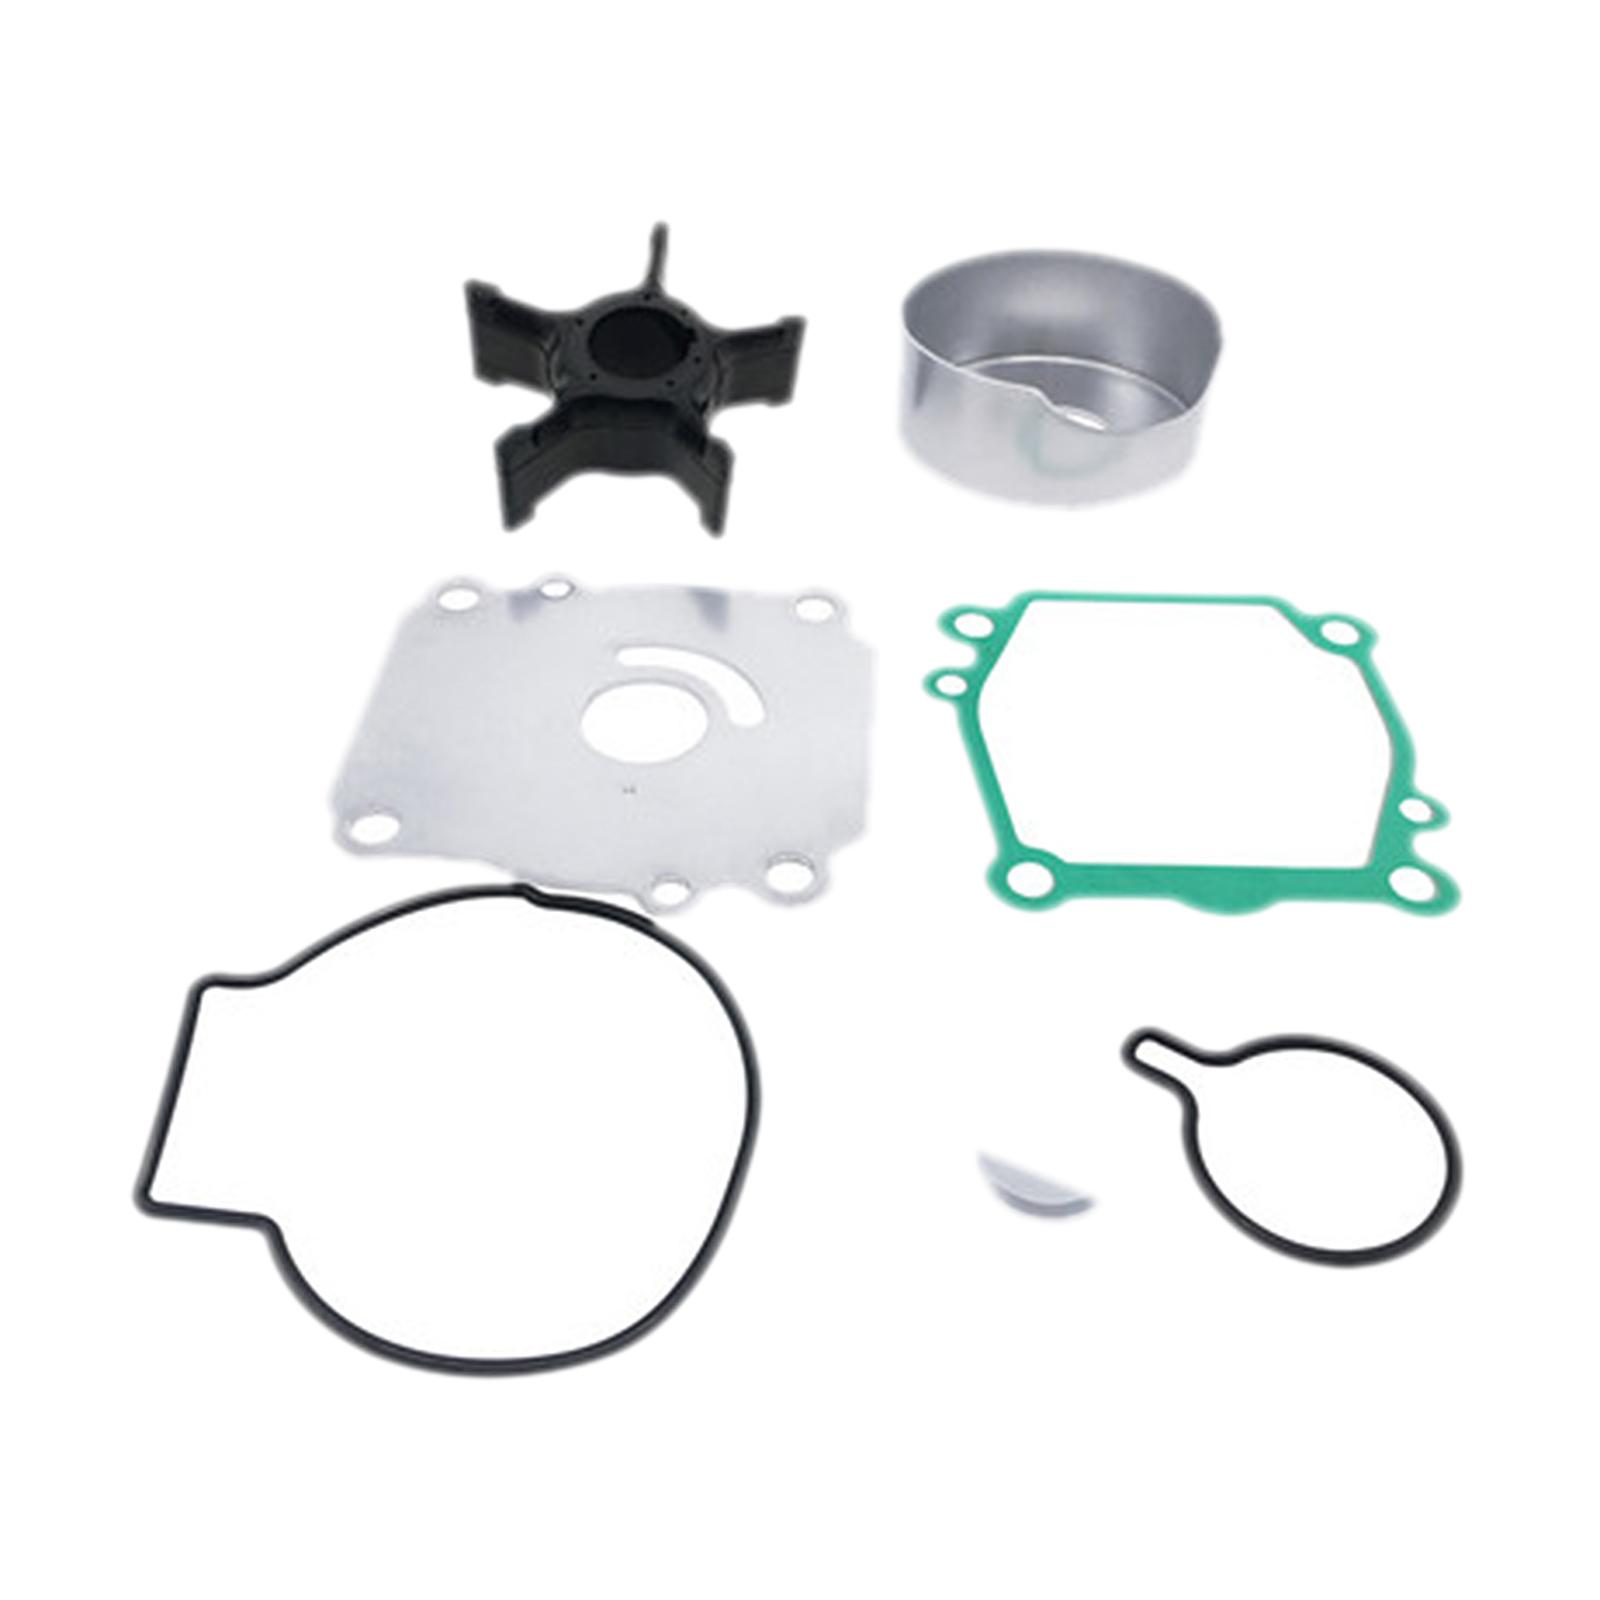 Water Pump Impeller Service Set Replaces 17400-92J00 for Suzuki Outboards